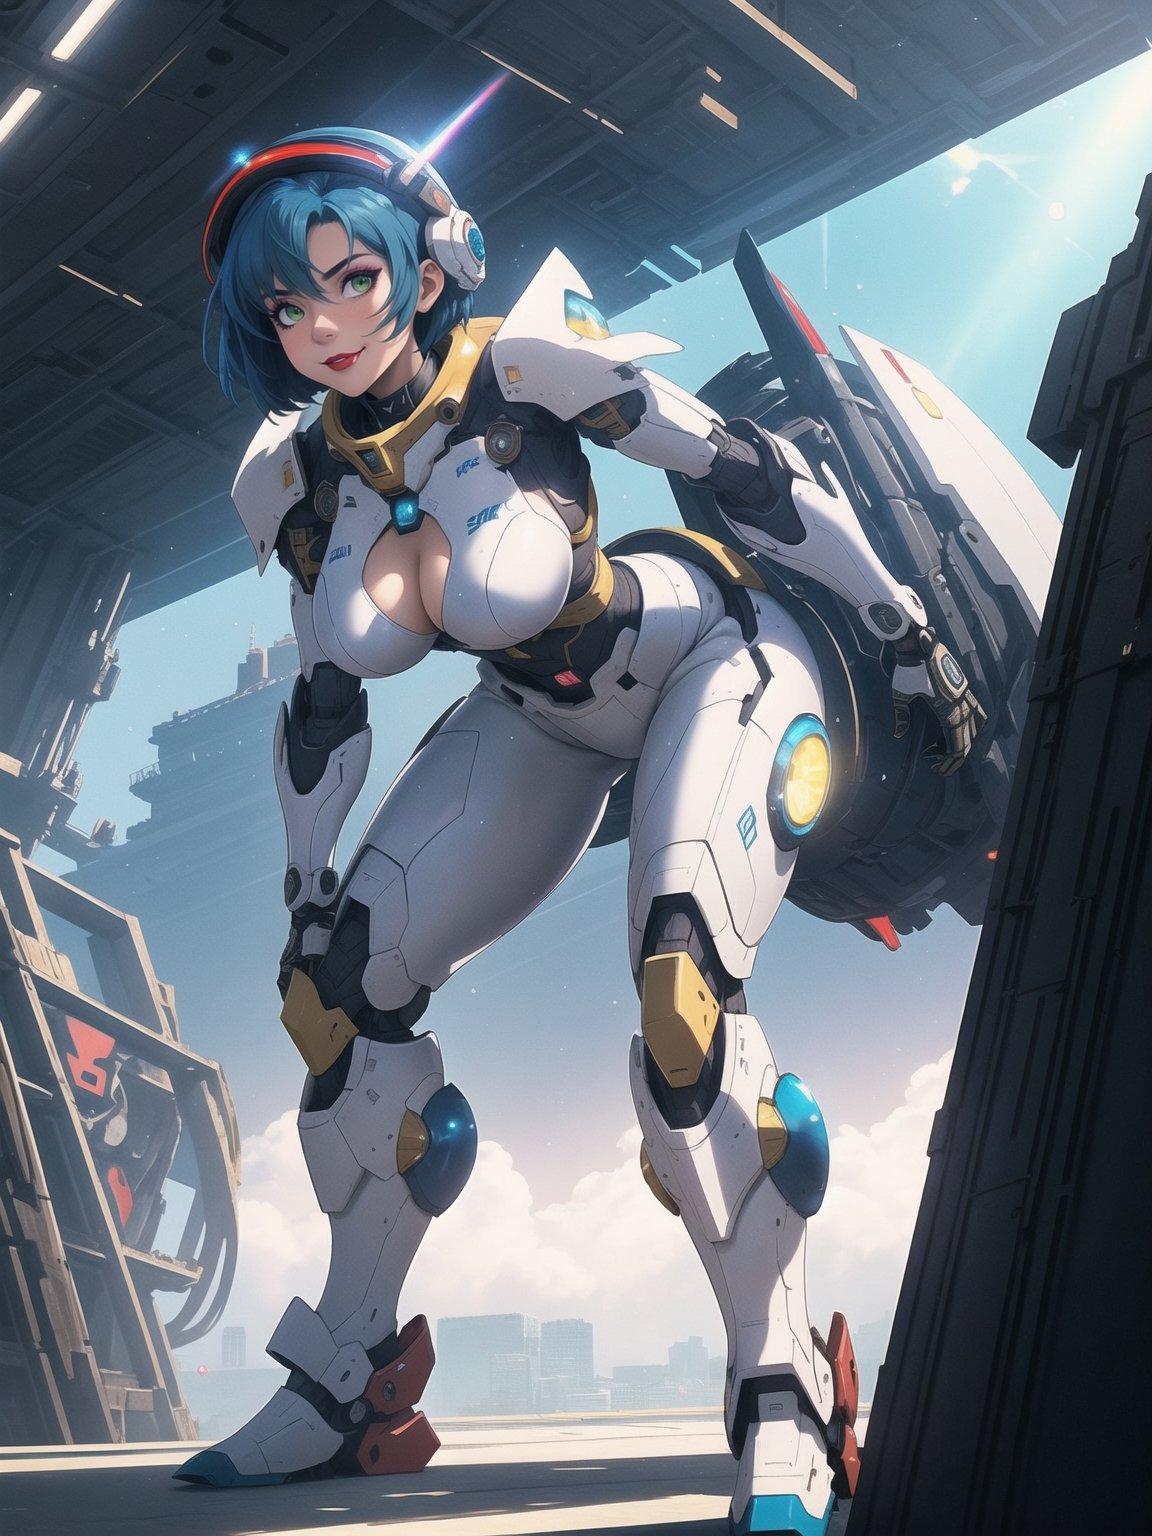 Impeccable 4K resolution, mecha musume style with a touch of contemporary anime. | A warrior clad in a white robotic suit, accentuated by blue accents, circular lights, and finely tuned details. Imposing breasts and short blue hair stand out under a helmet. She stares at the viewer with determination, standing on a futuristic aircraft filled with Square Enix machinery and equipment. The window reveals a shimmering scenery as the protagonist prepares for adventure. | Dynamic composition, attractive angle, and f/4.0 aperture to highlight the character and the Chrono Trigger environment. Effects like glow and lights enhance the futuristic look. | A mecha musume warrior from Square Enix, ready to explore new horizons in her technological aircraft. | She: ((interacting and leaning on anything, very large structure+object, leaning against, sensual pose):1.5), ((Full body image)), perfect hand, fingers, hand, perfect, better_hands, More Detail.